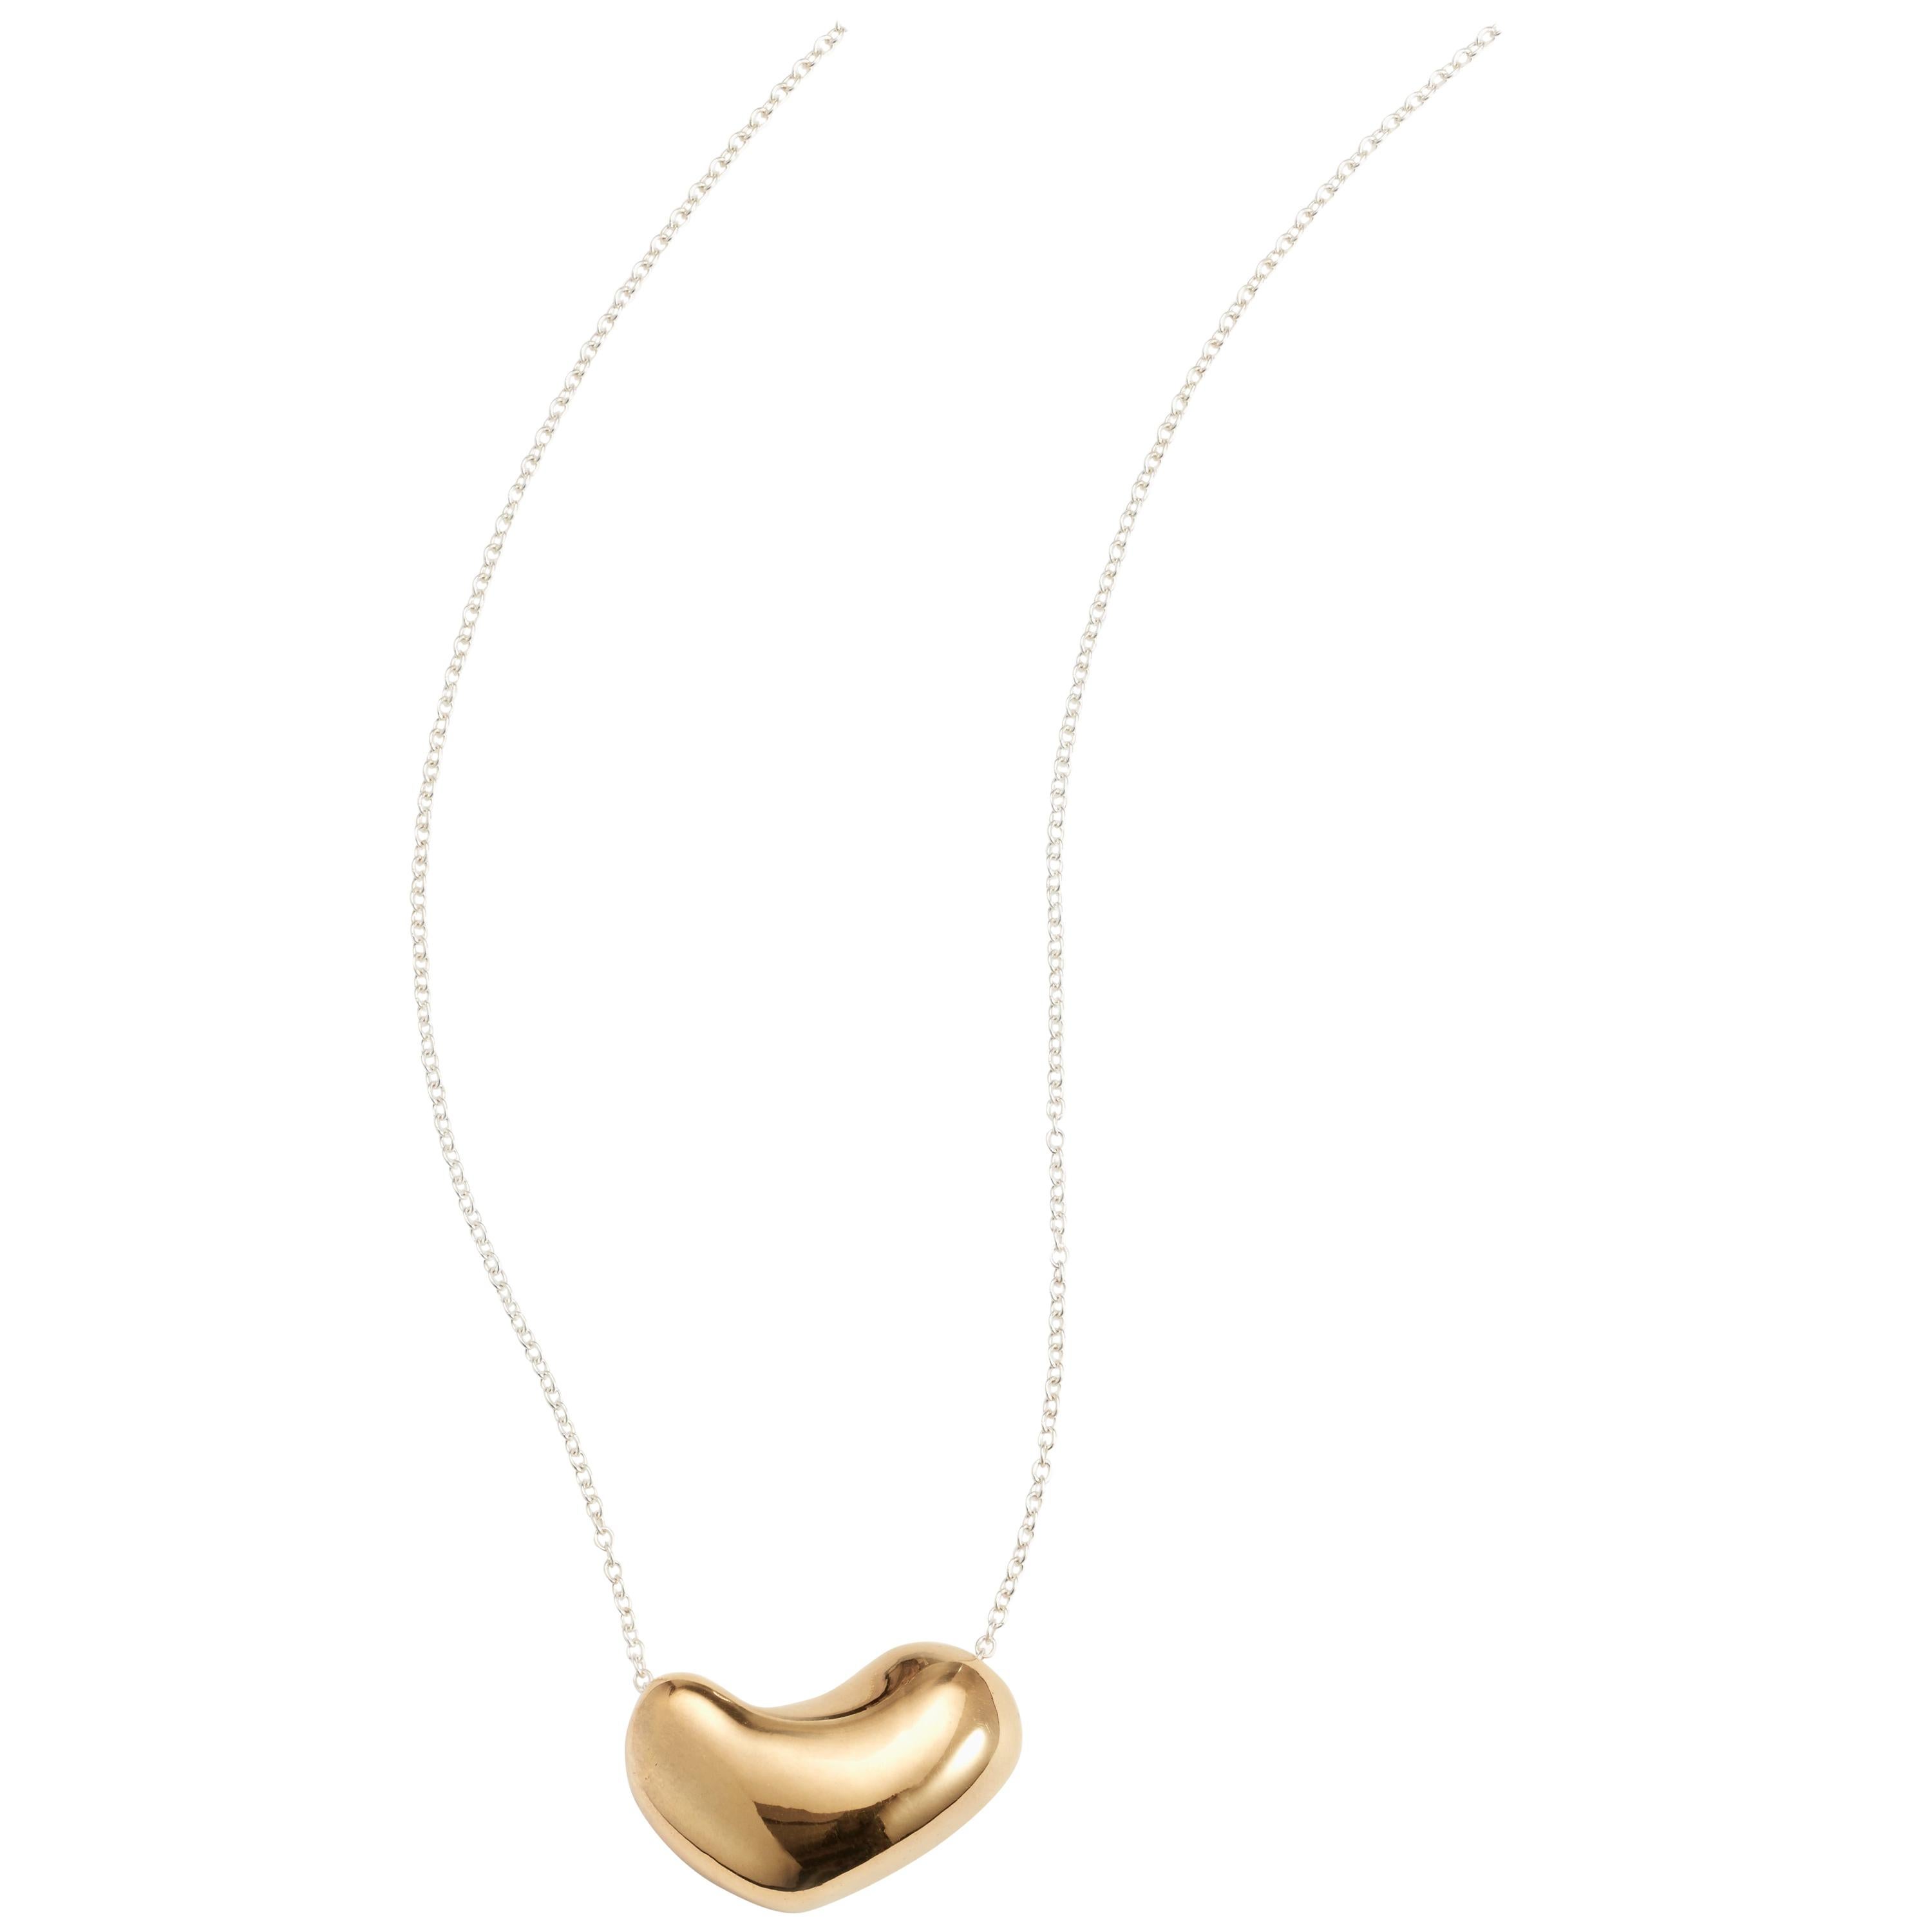 AGMES Gold Vermeil Small Abstract Sculpted Heart Pendant Necklace on Chain